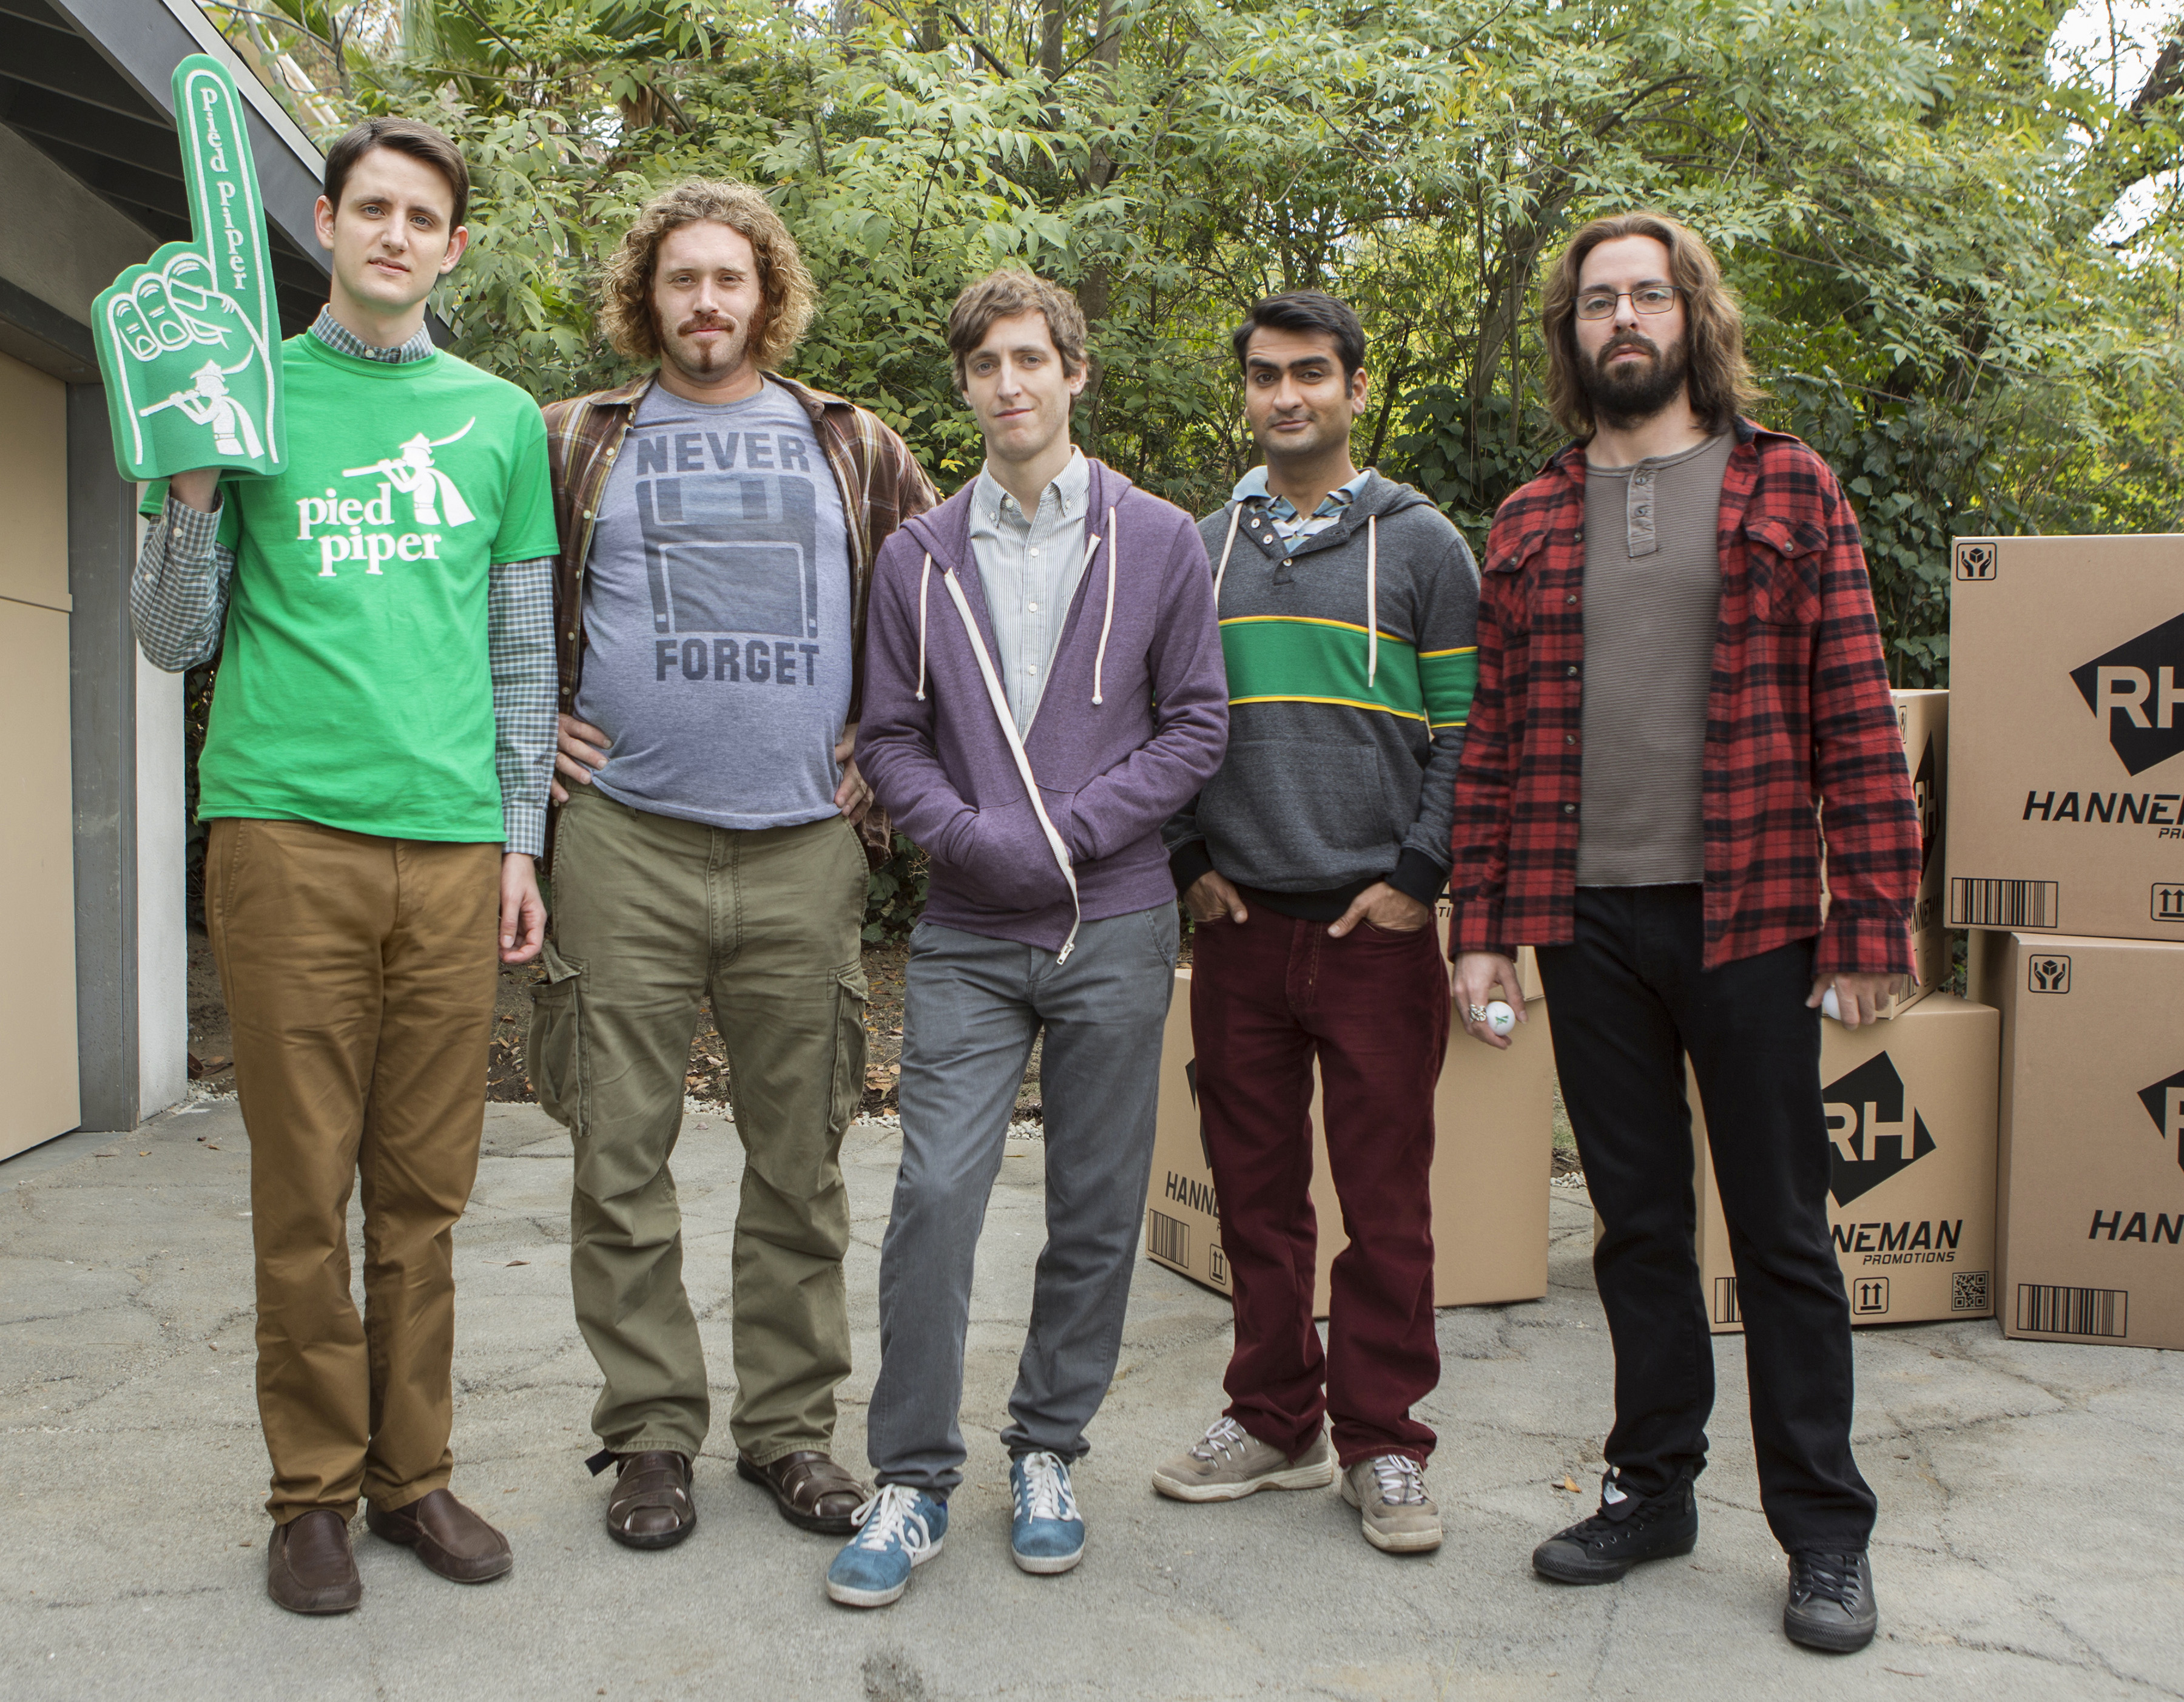 Still of Martin Starr, Zach Woods, T.J. Miller, Thomas Middleditch and Kumail Nanjiani in Silicon Valley (2014)